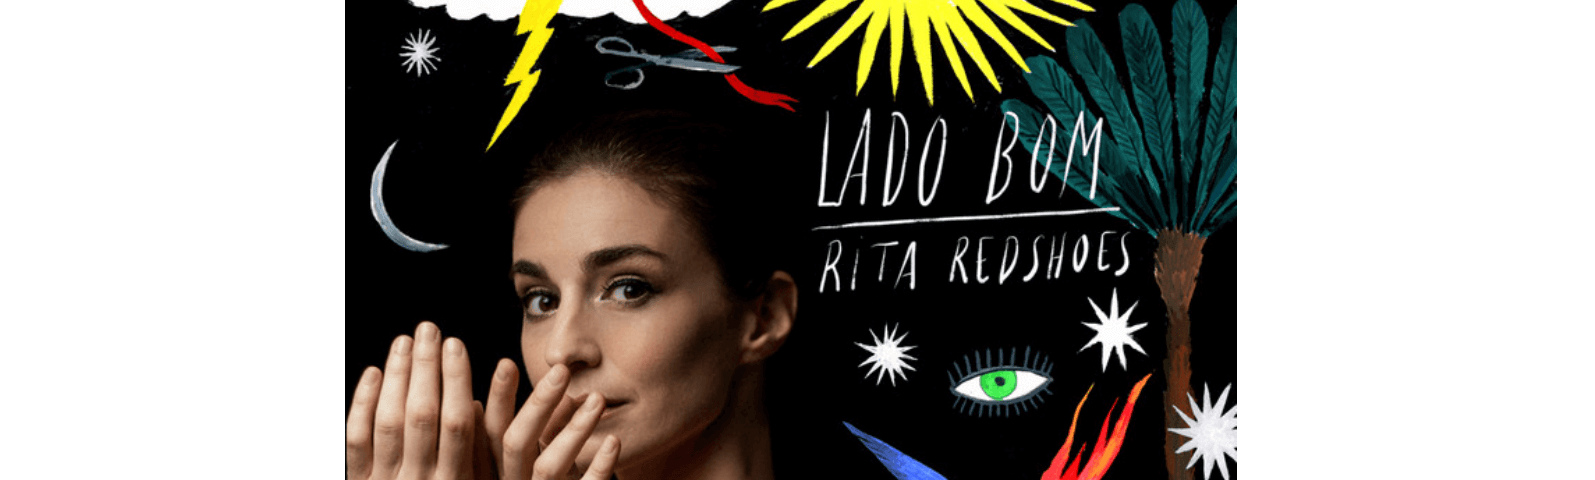 Rita Redshoes on the cover of her latest album “Lado Bom.”